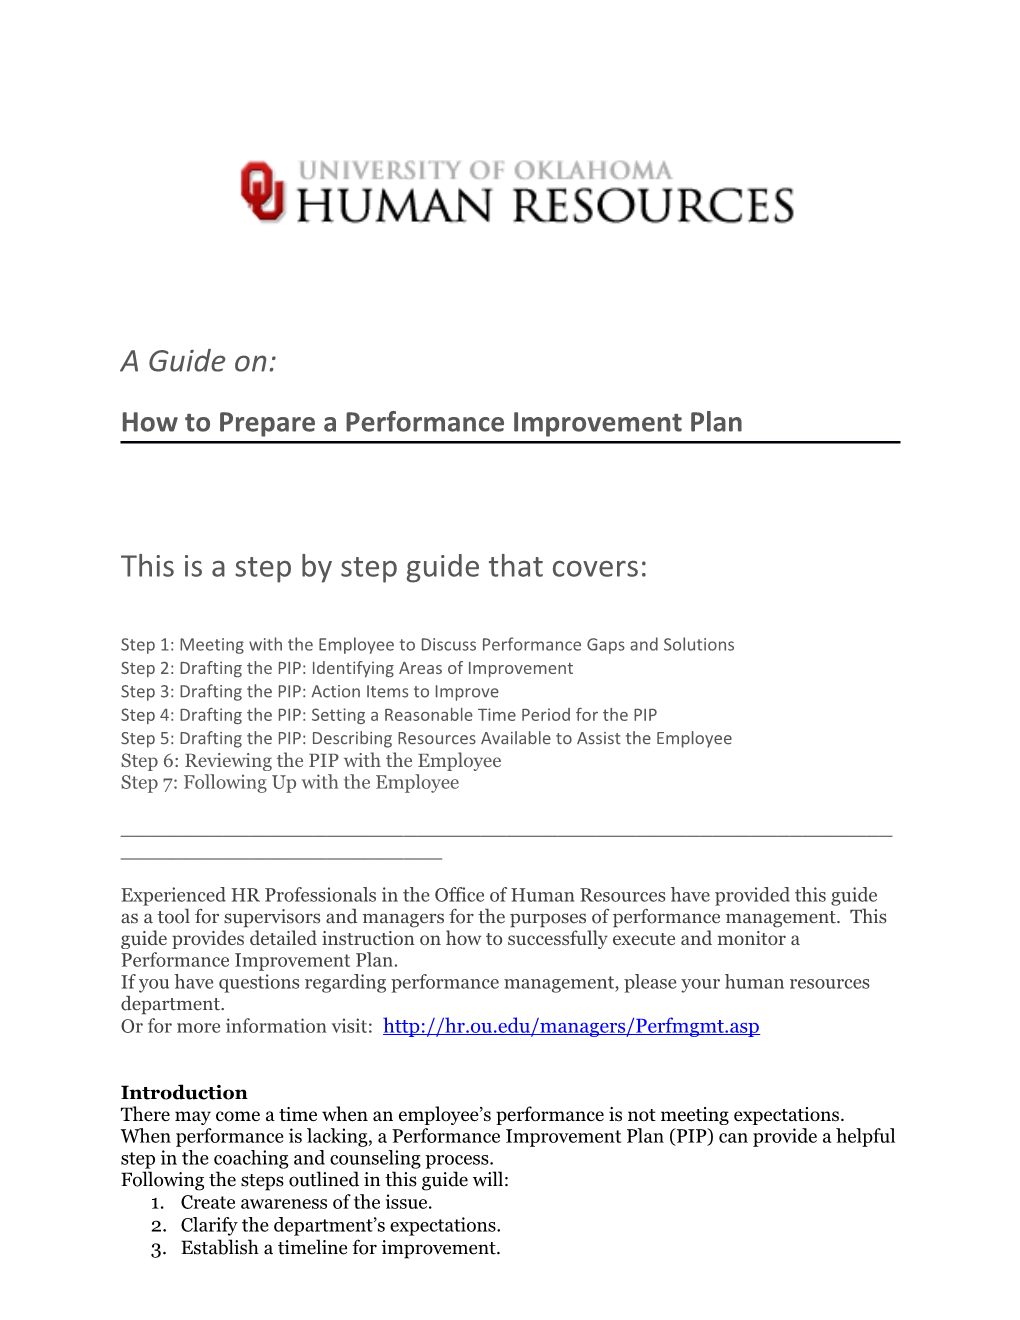 How to Prepare a Performance Improvement Plan